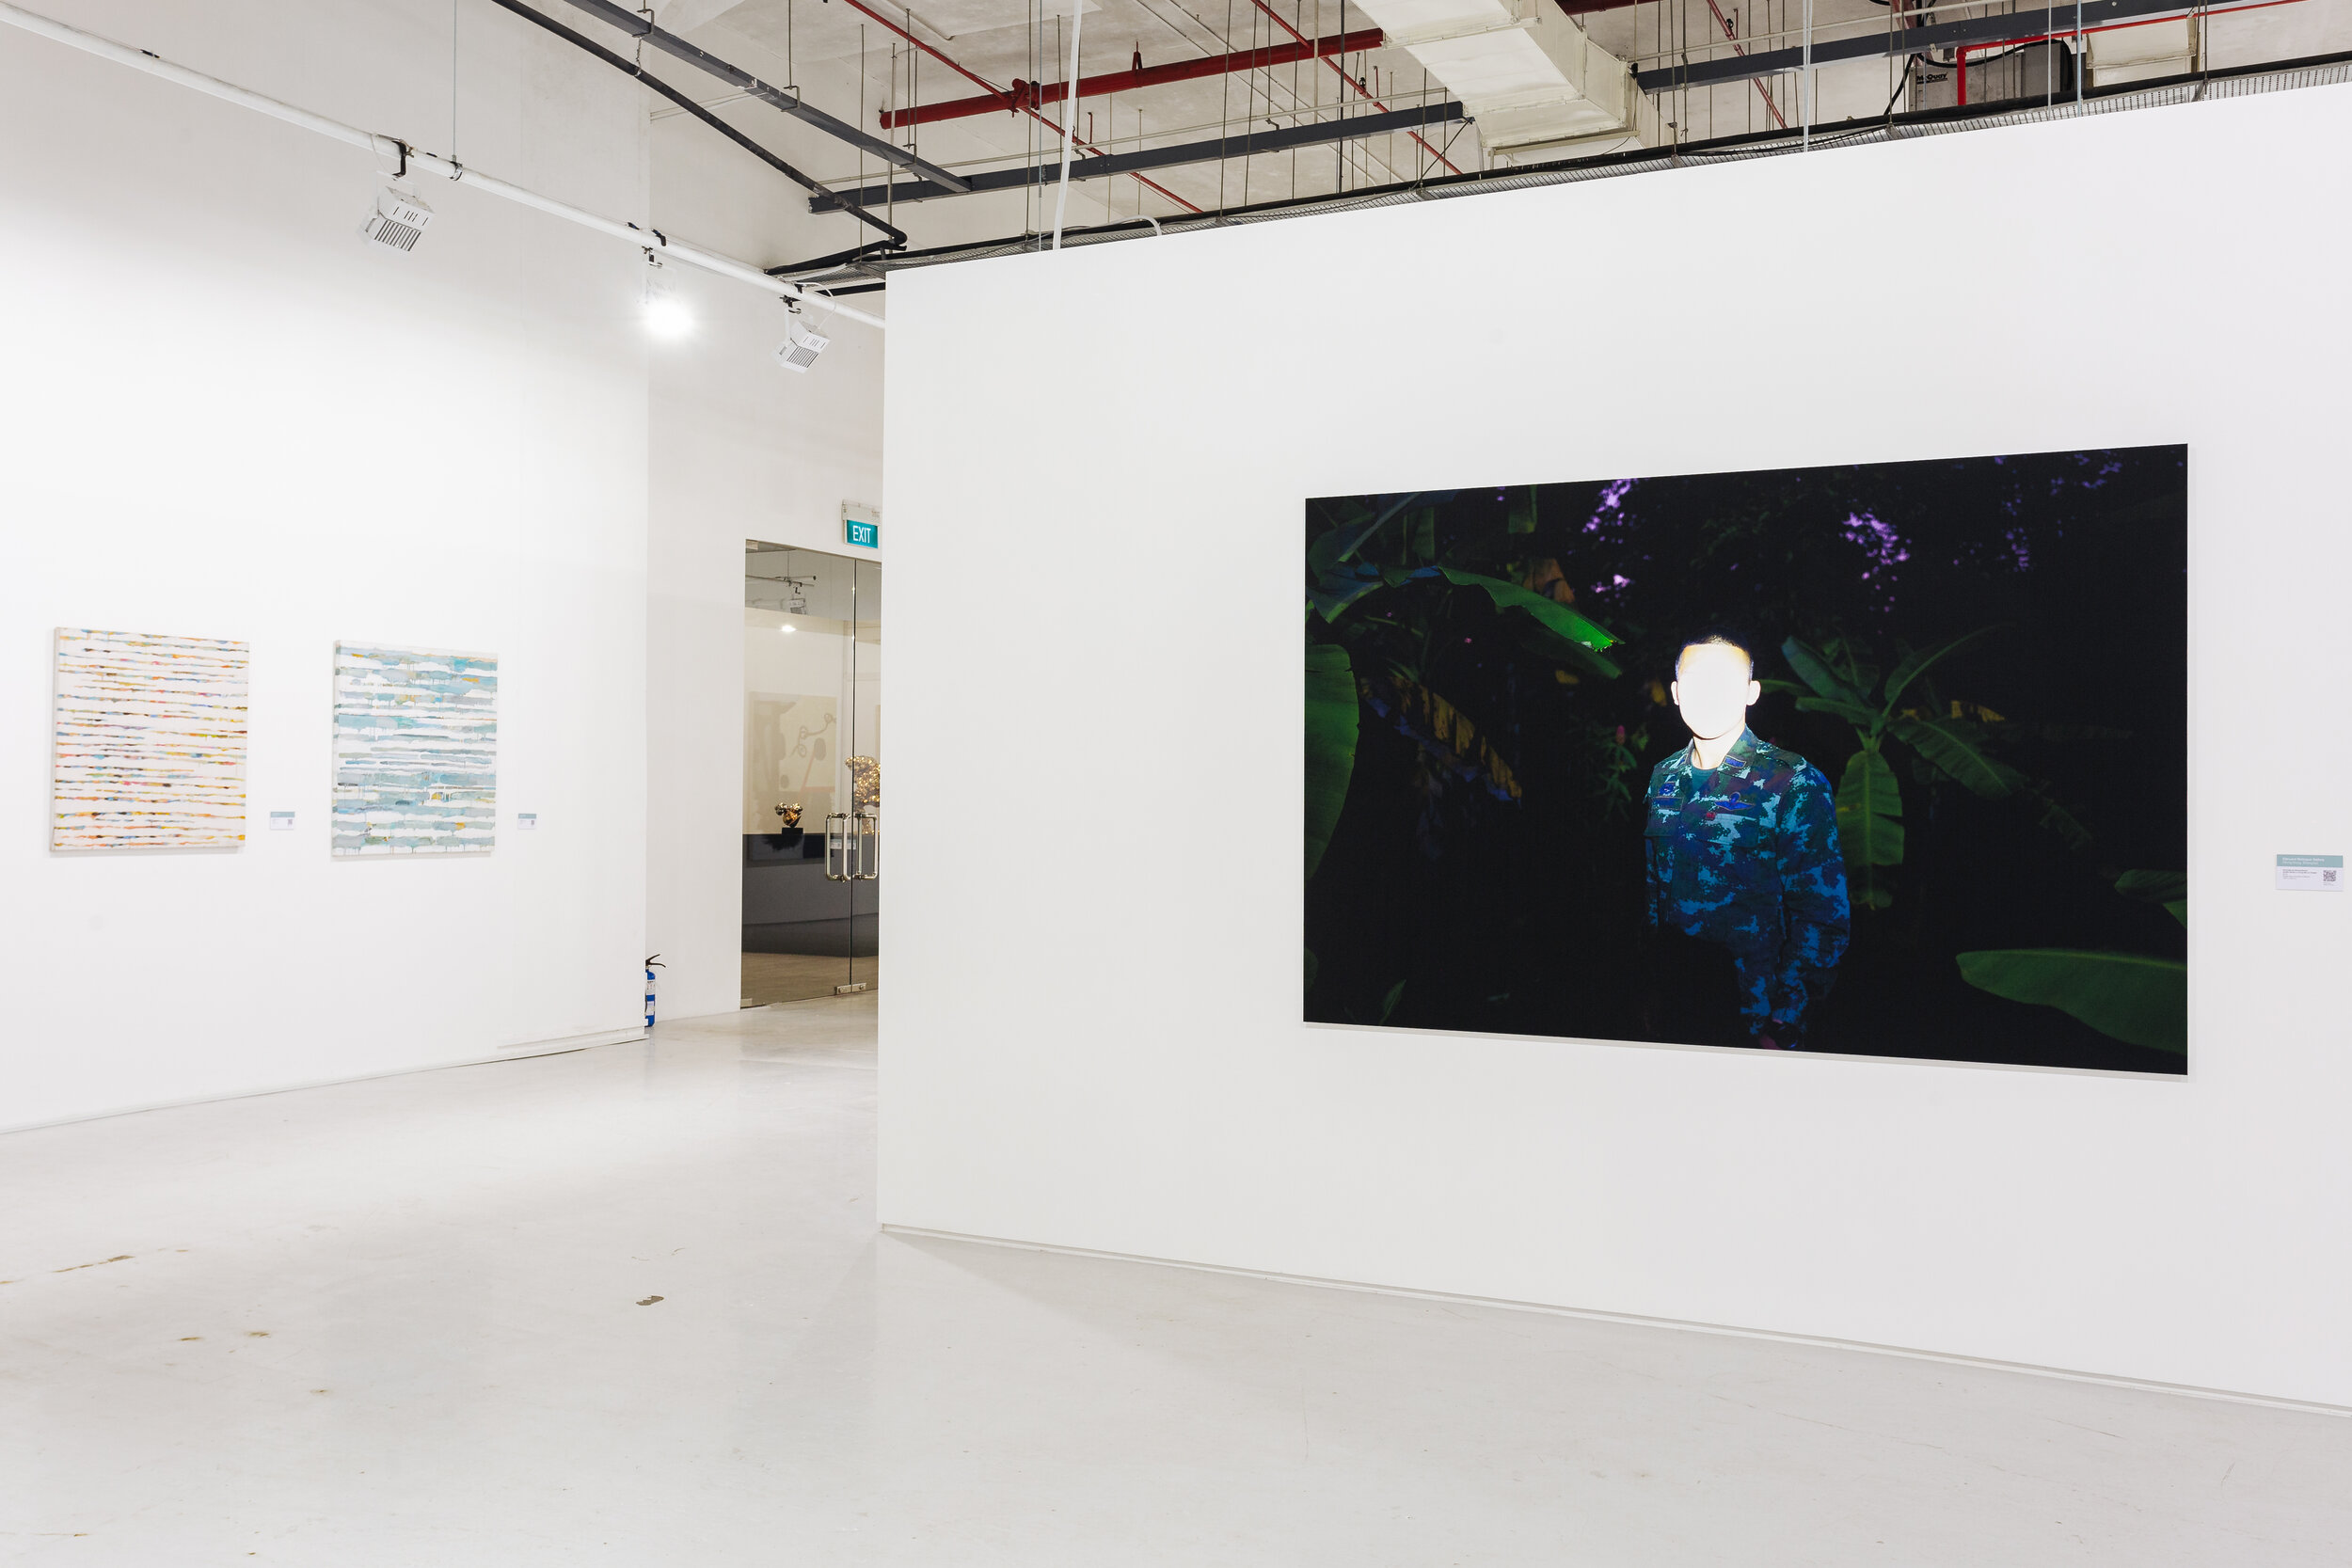 CUC Gallery at S.E.A. Focus Curated: Hyper–Horizon (Singapore 2021)